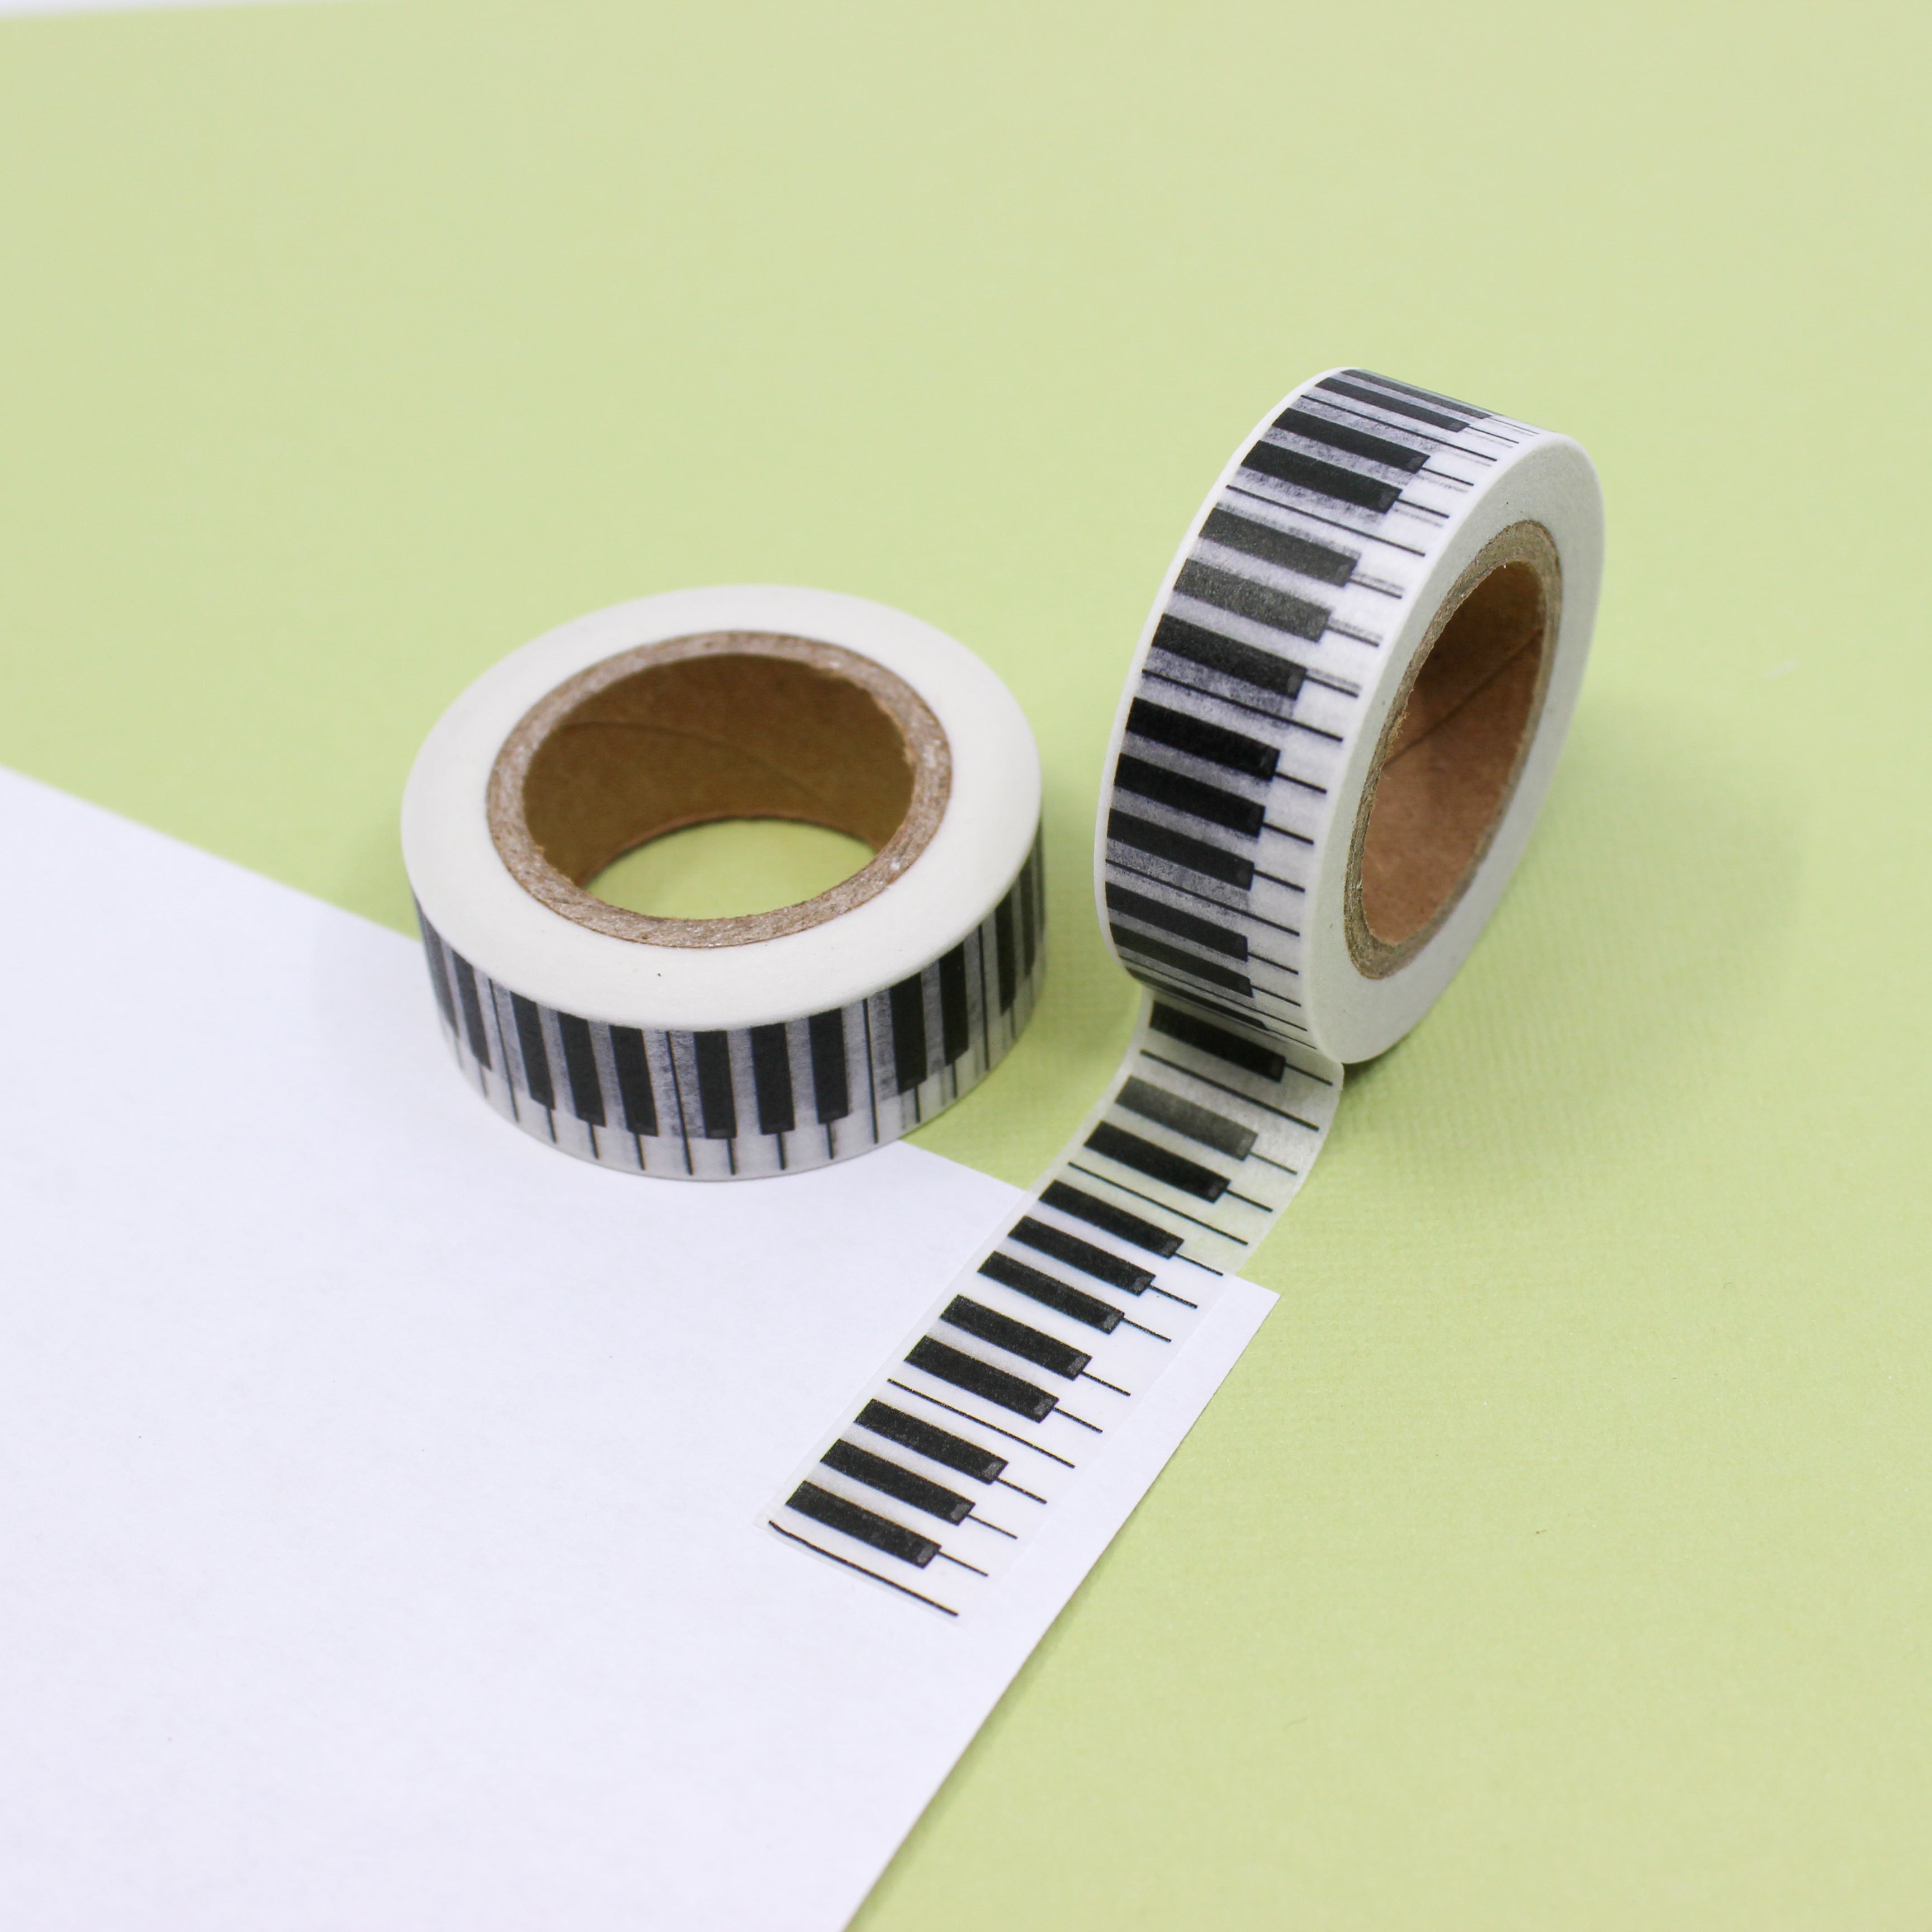 This is a black and white piano keys view themed washi tape from BBB Supplies Craft Shop